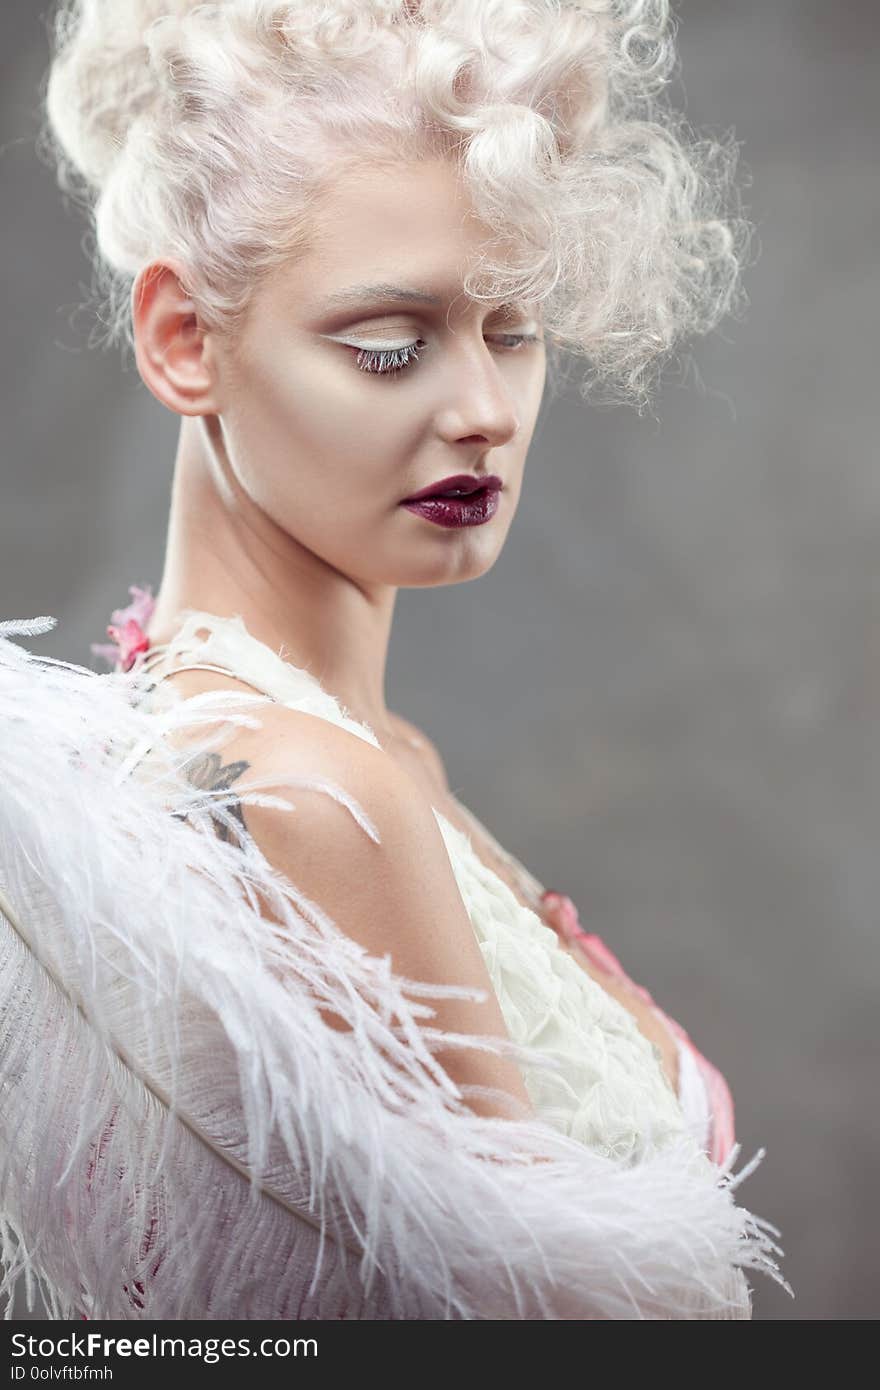 Young attractive woman with platinum blonde and purple lipstick. Fantasy style portrait of a lady with white curls and white feather.